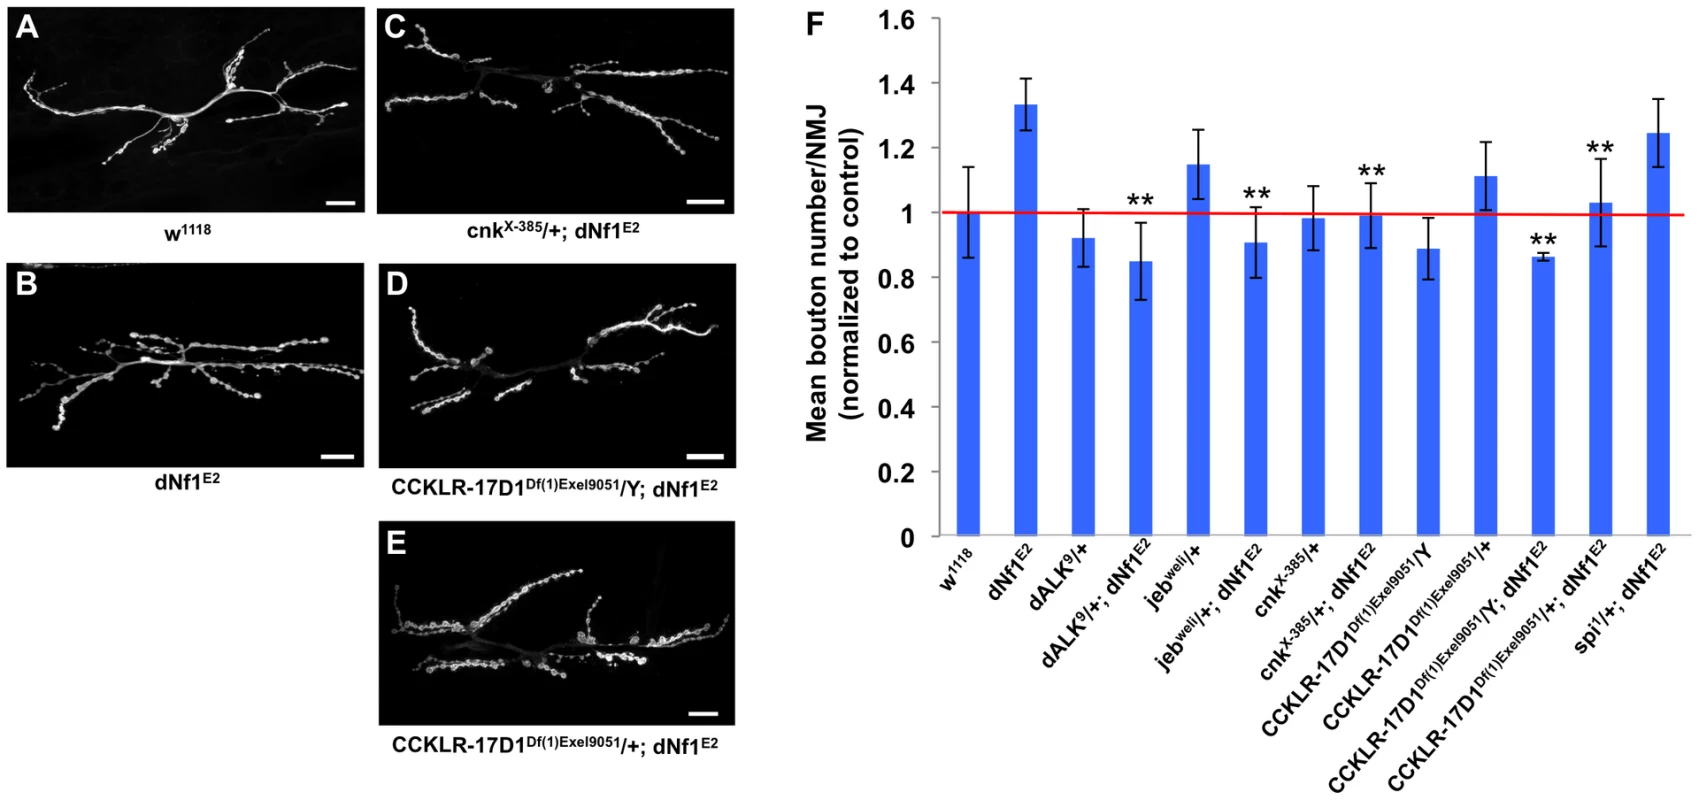 Several <i>dNf1</i> pupal size defect suppressors also suppress a NMJ synaptic overgrowth phenotype.